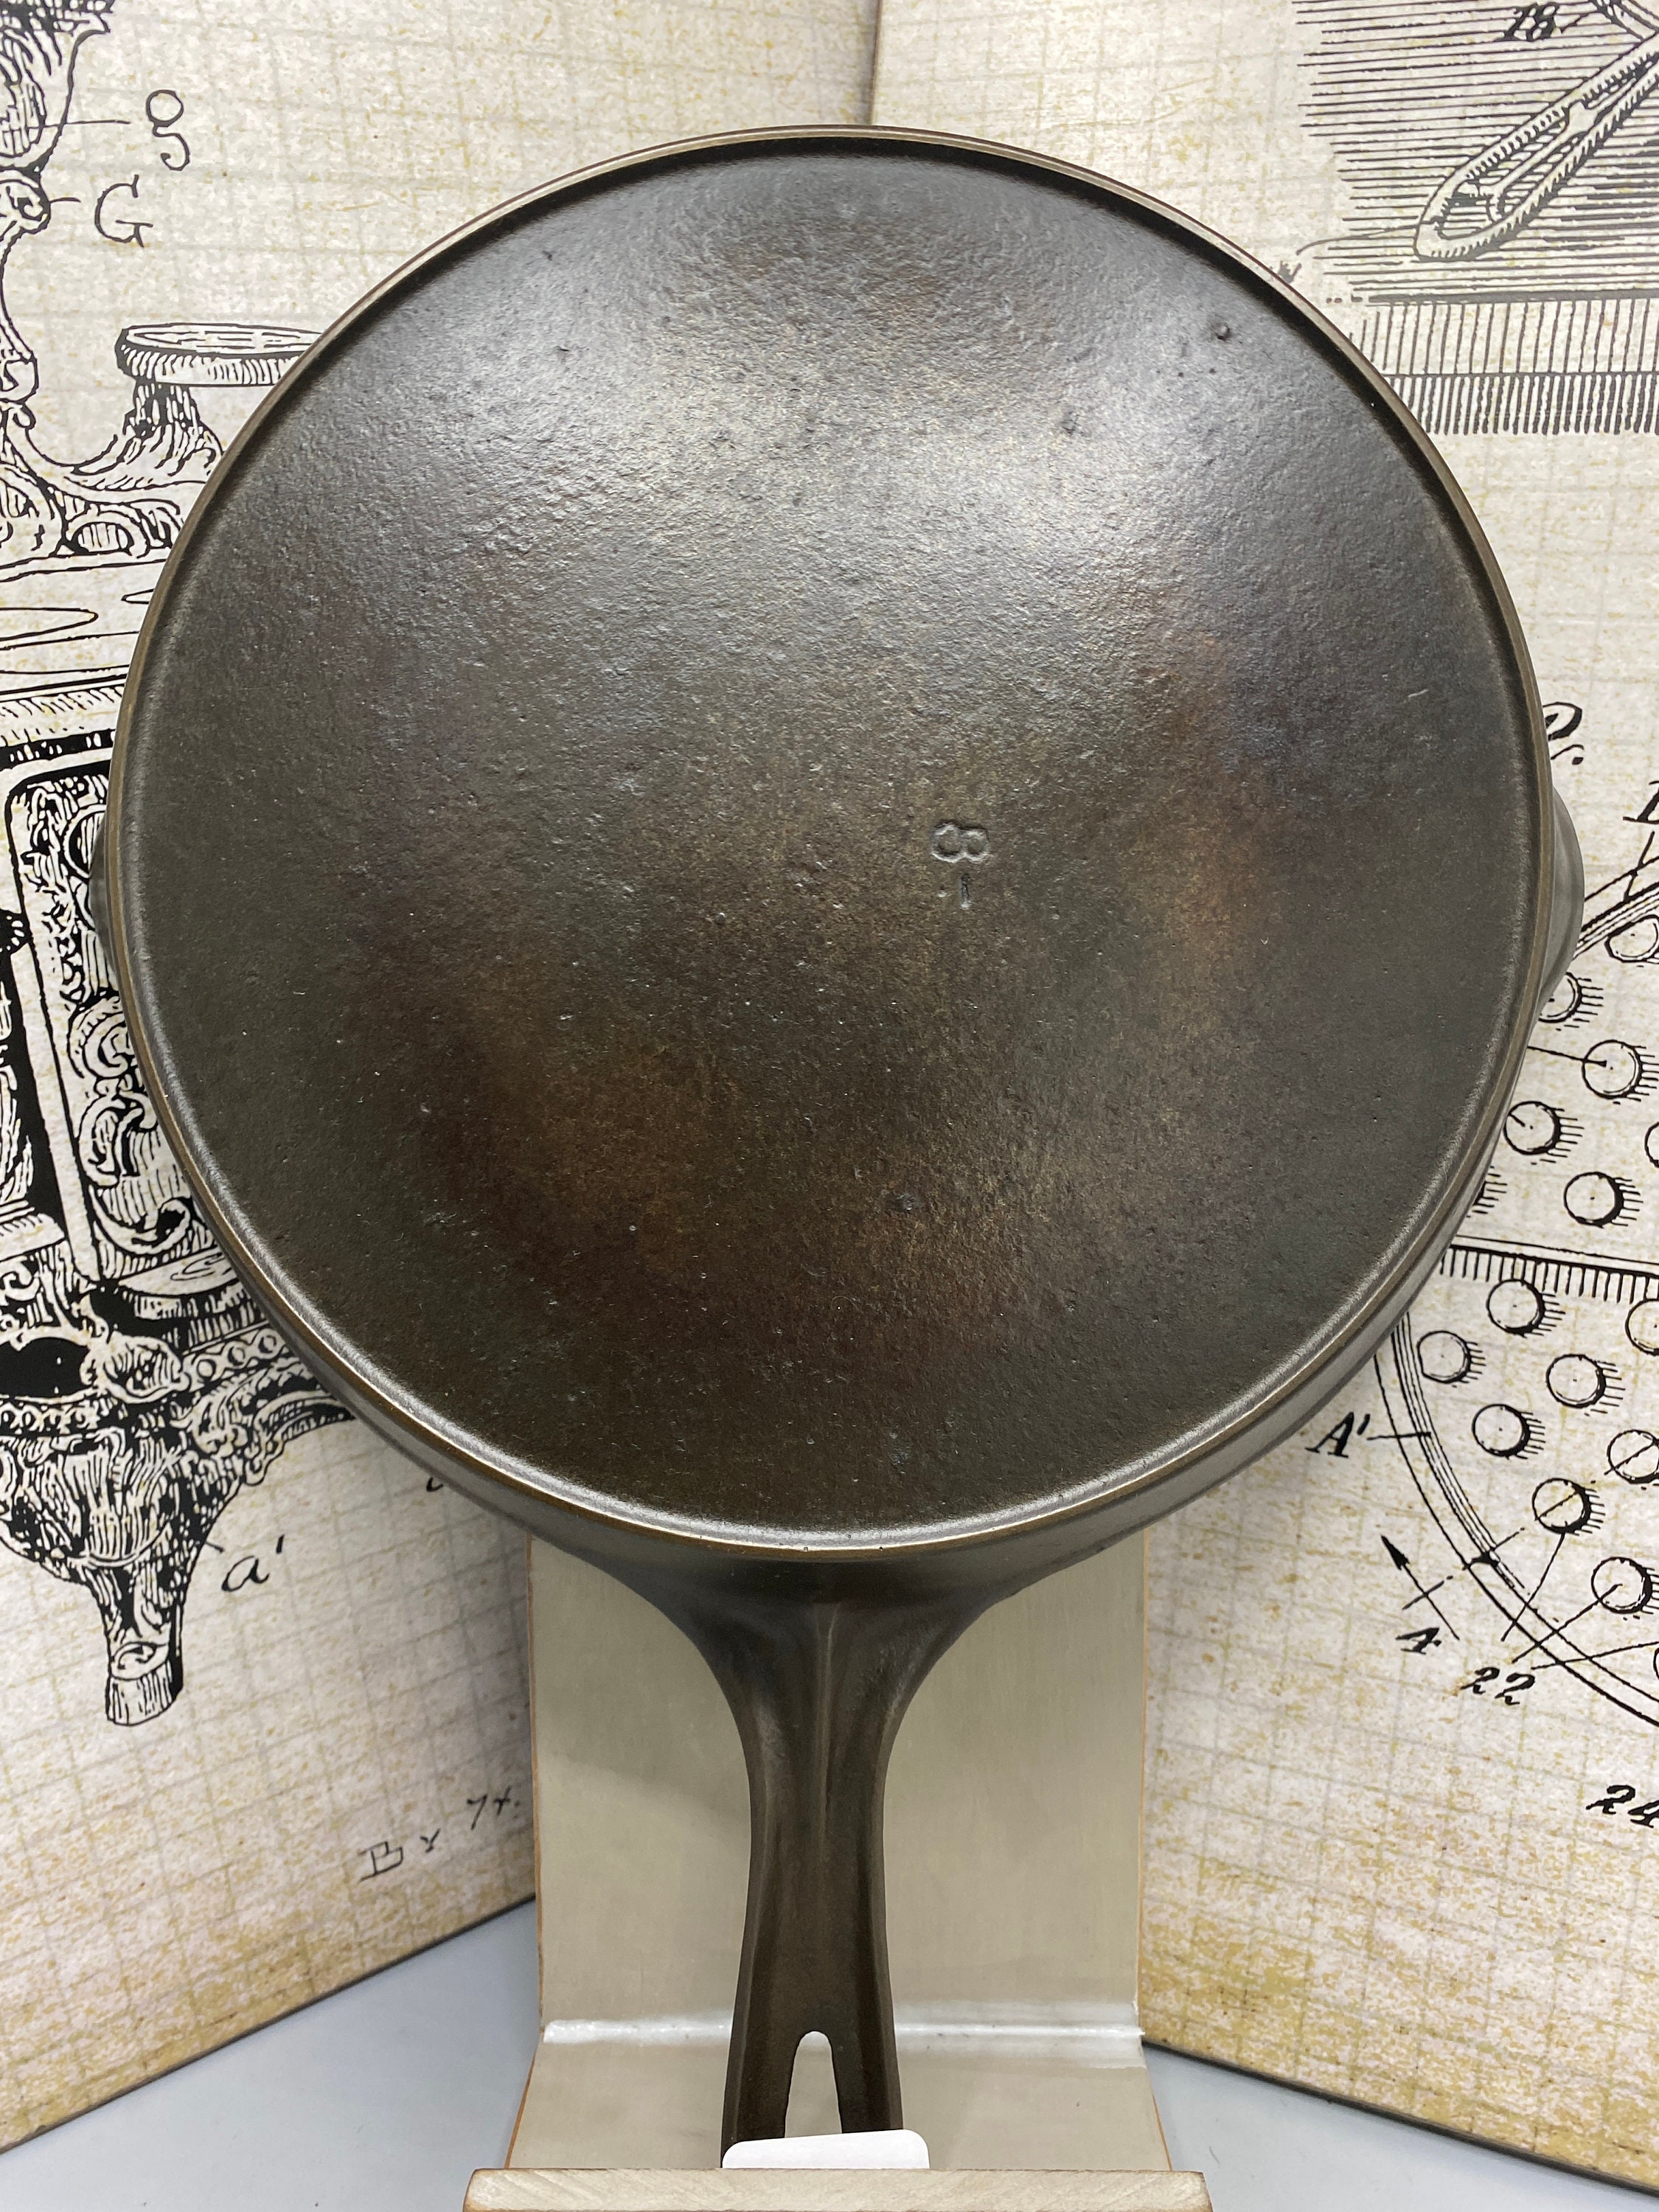 Identifying the Griswold Iron Mountain Line of Vintage Cast Iron